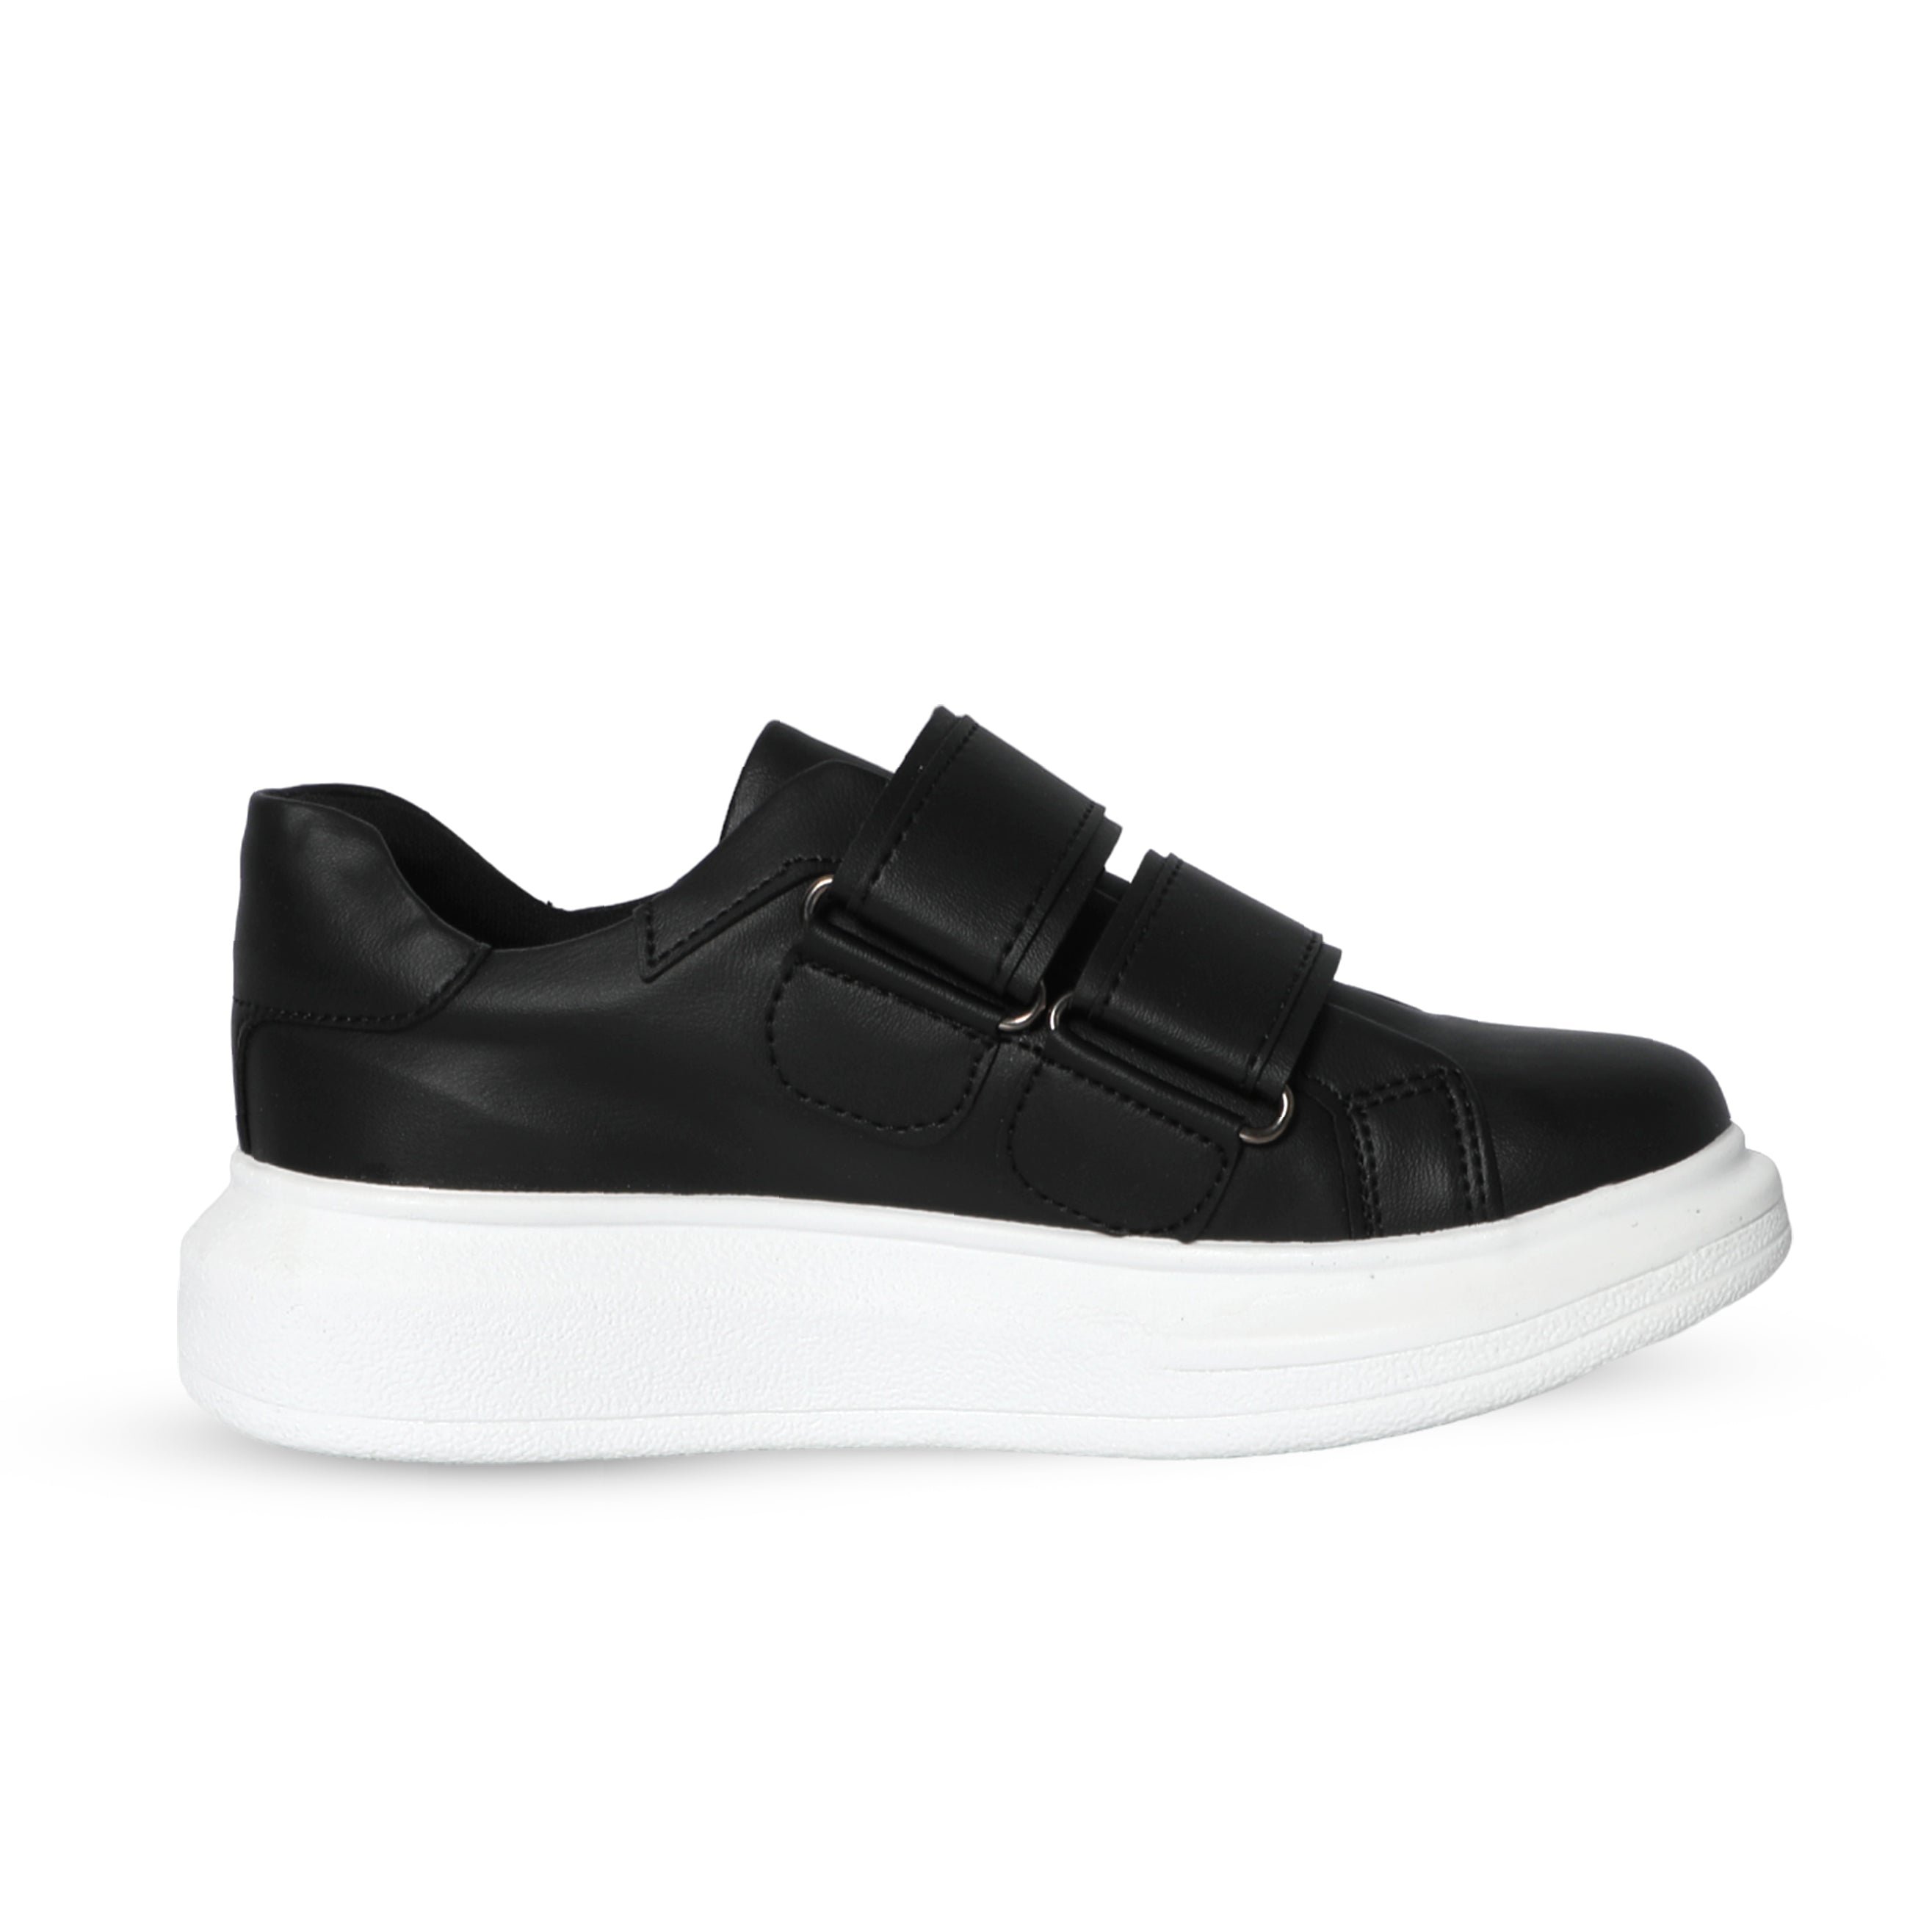 Women Black Casual Shoes With Velcro Straps